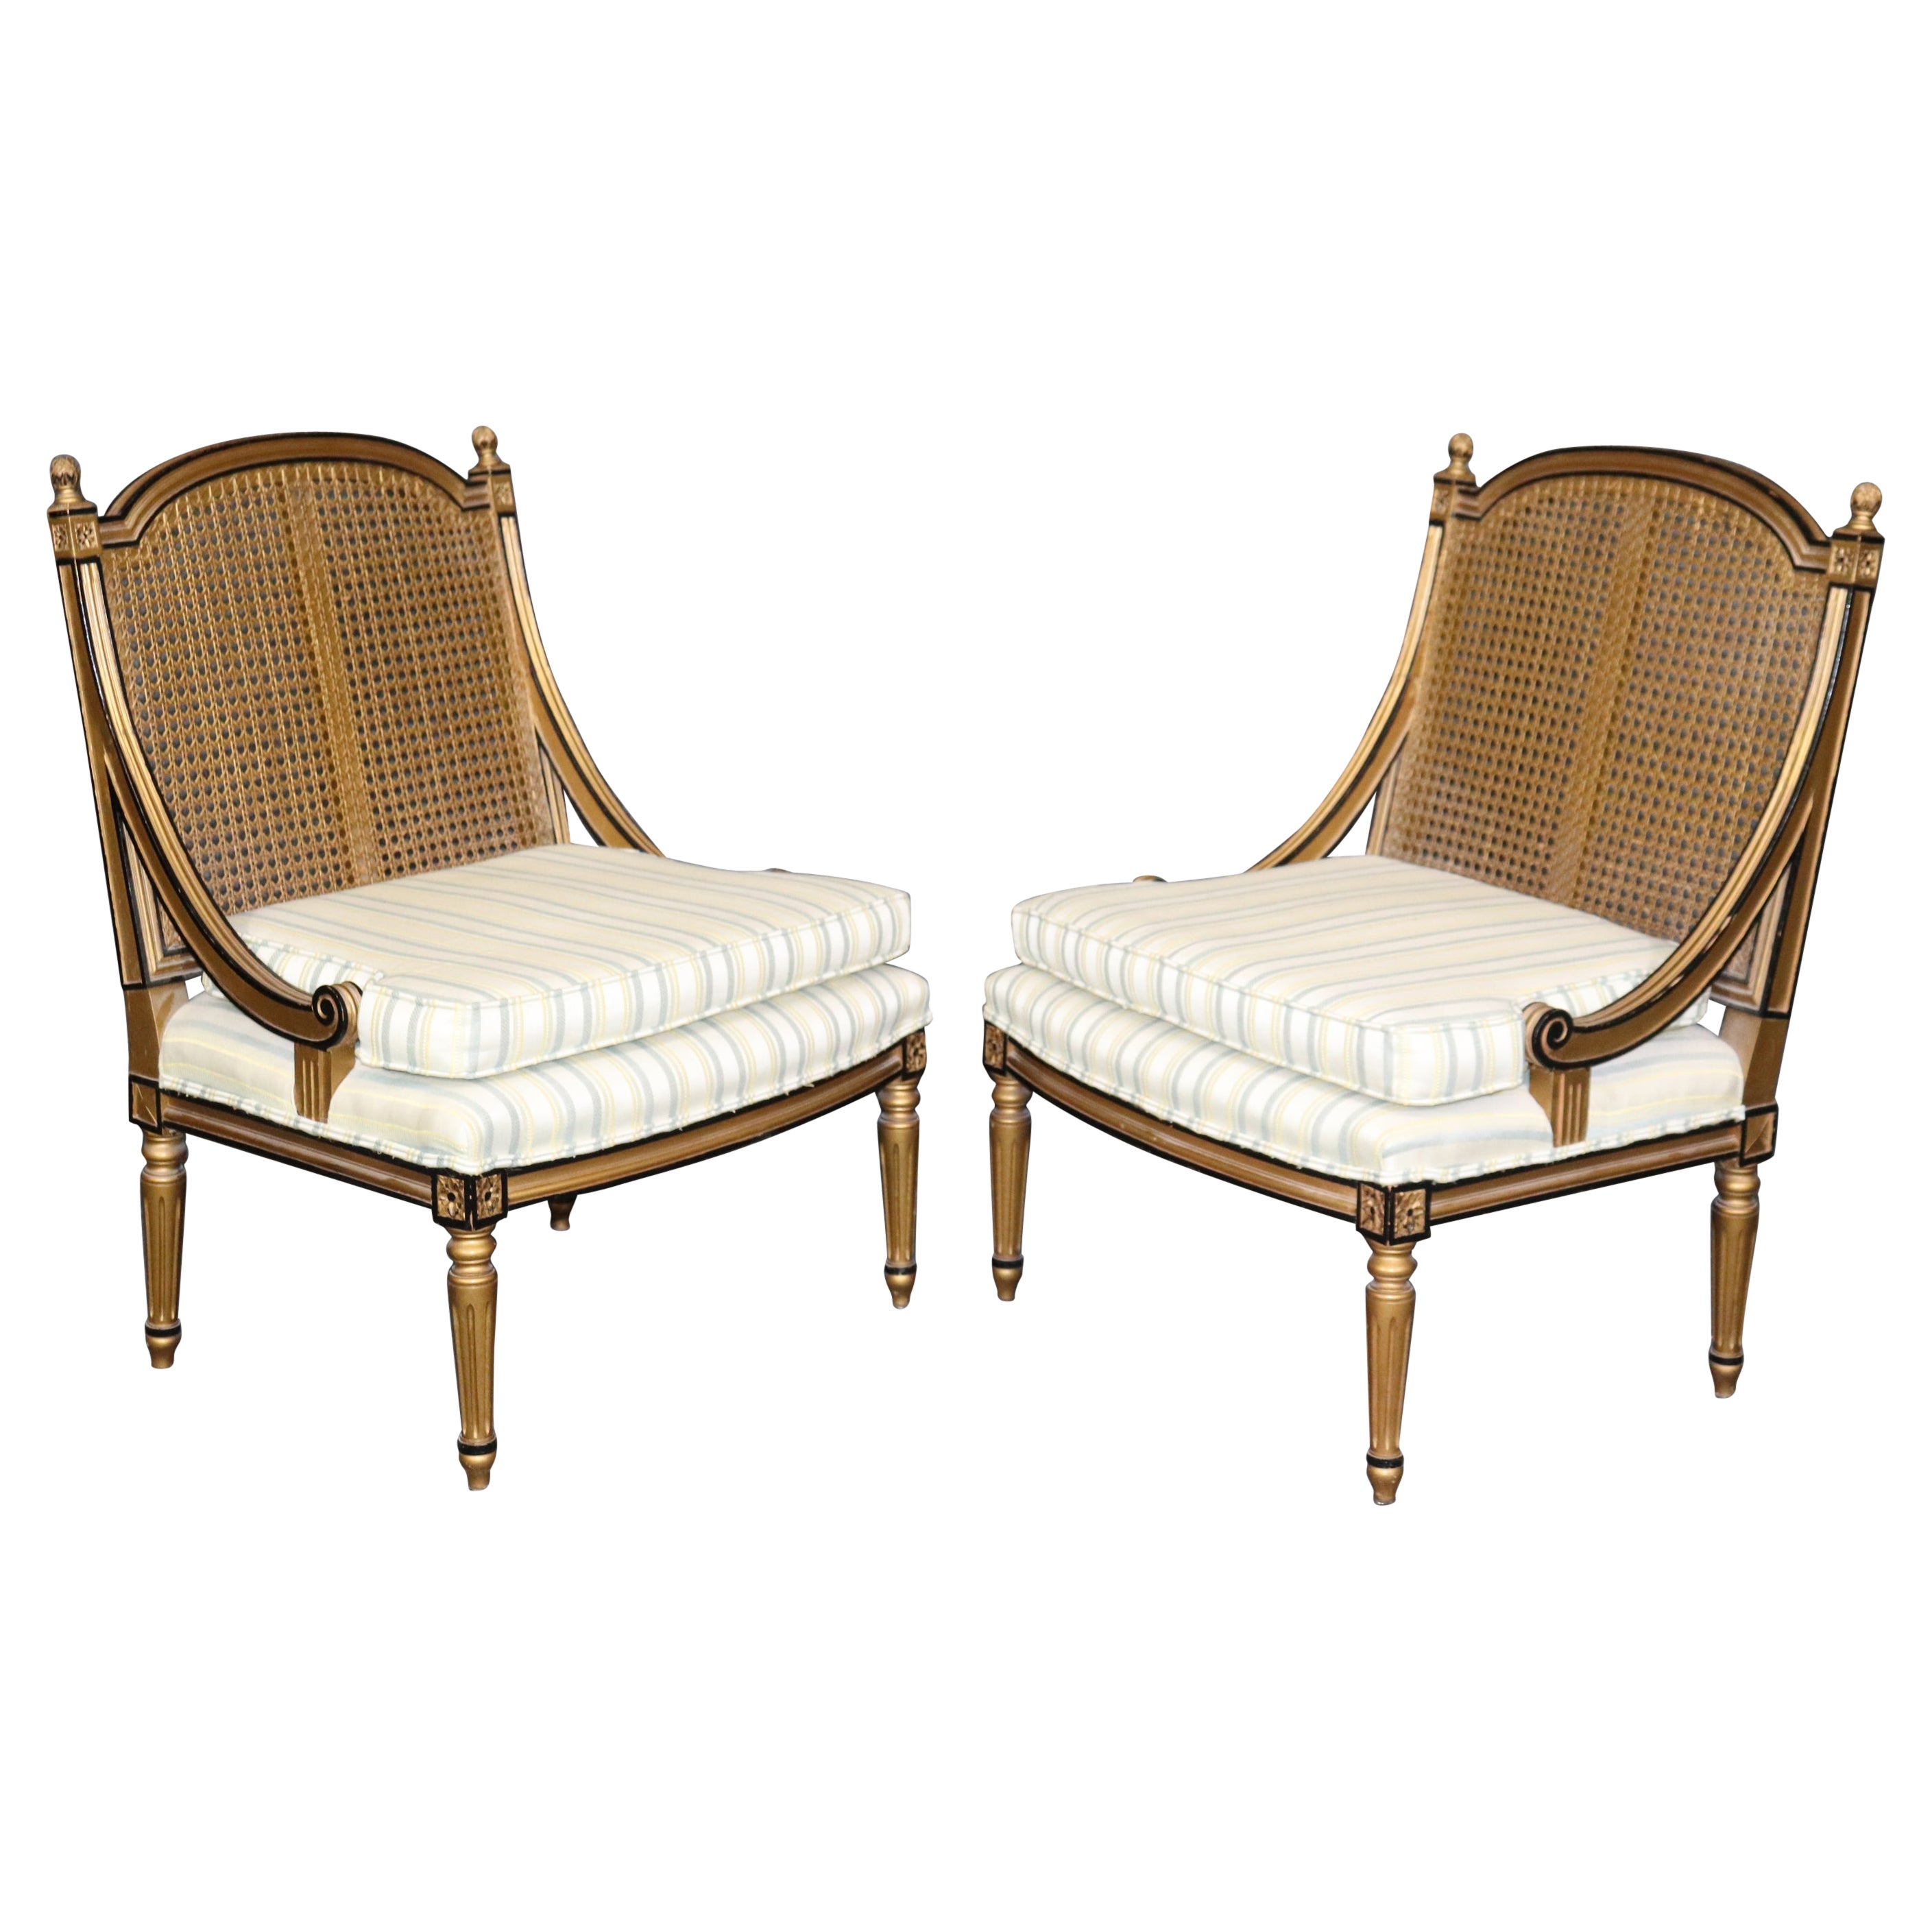 Pair of French Louis XVI Style Black and Gold Cane Back Bergeres, Lounge Chairs